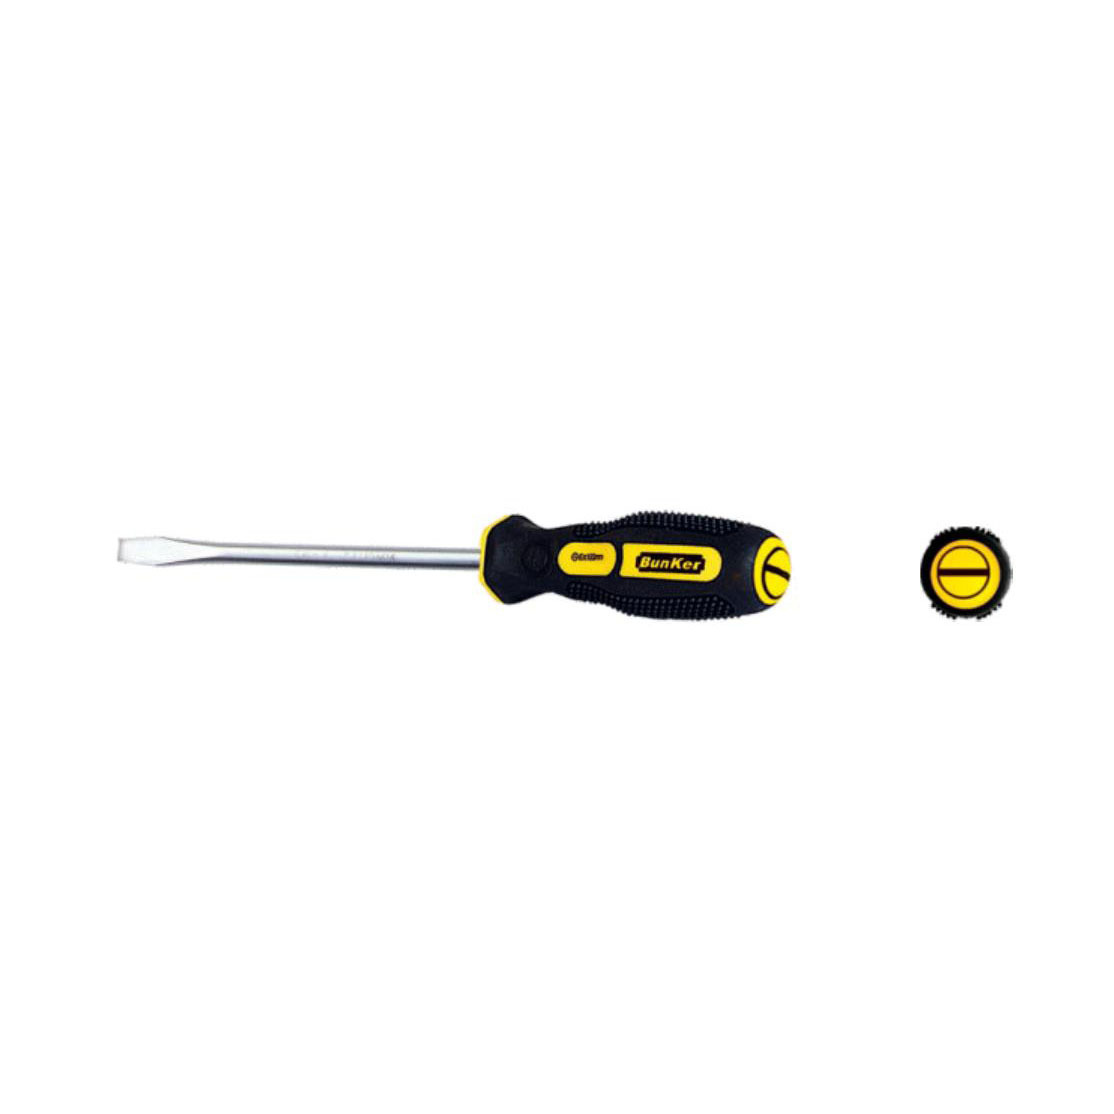 209 series rubber and plastic handle screwdriver